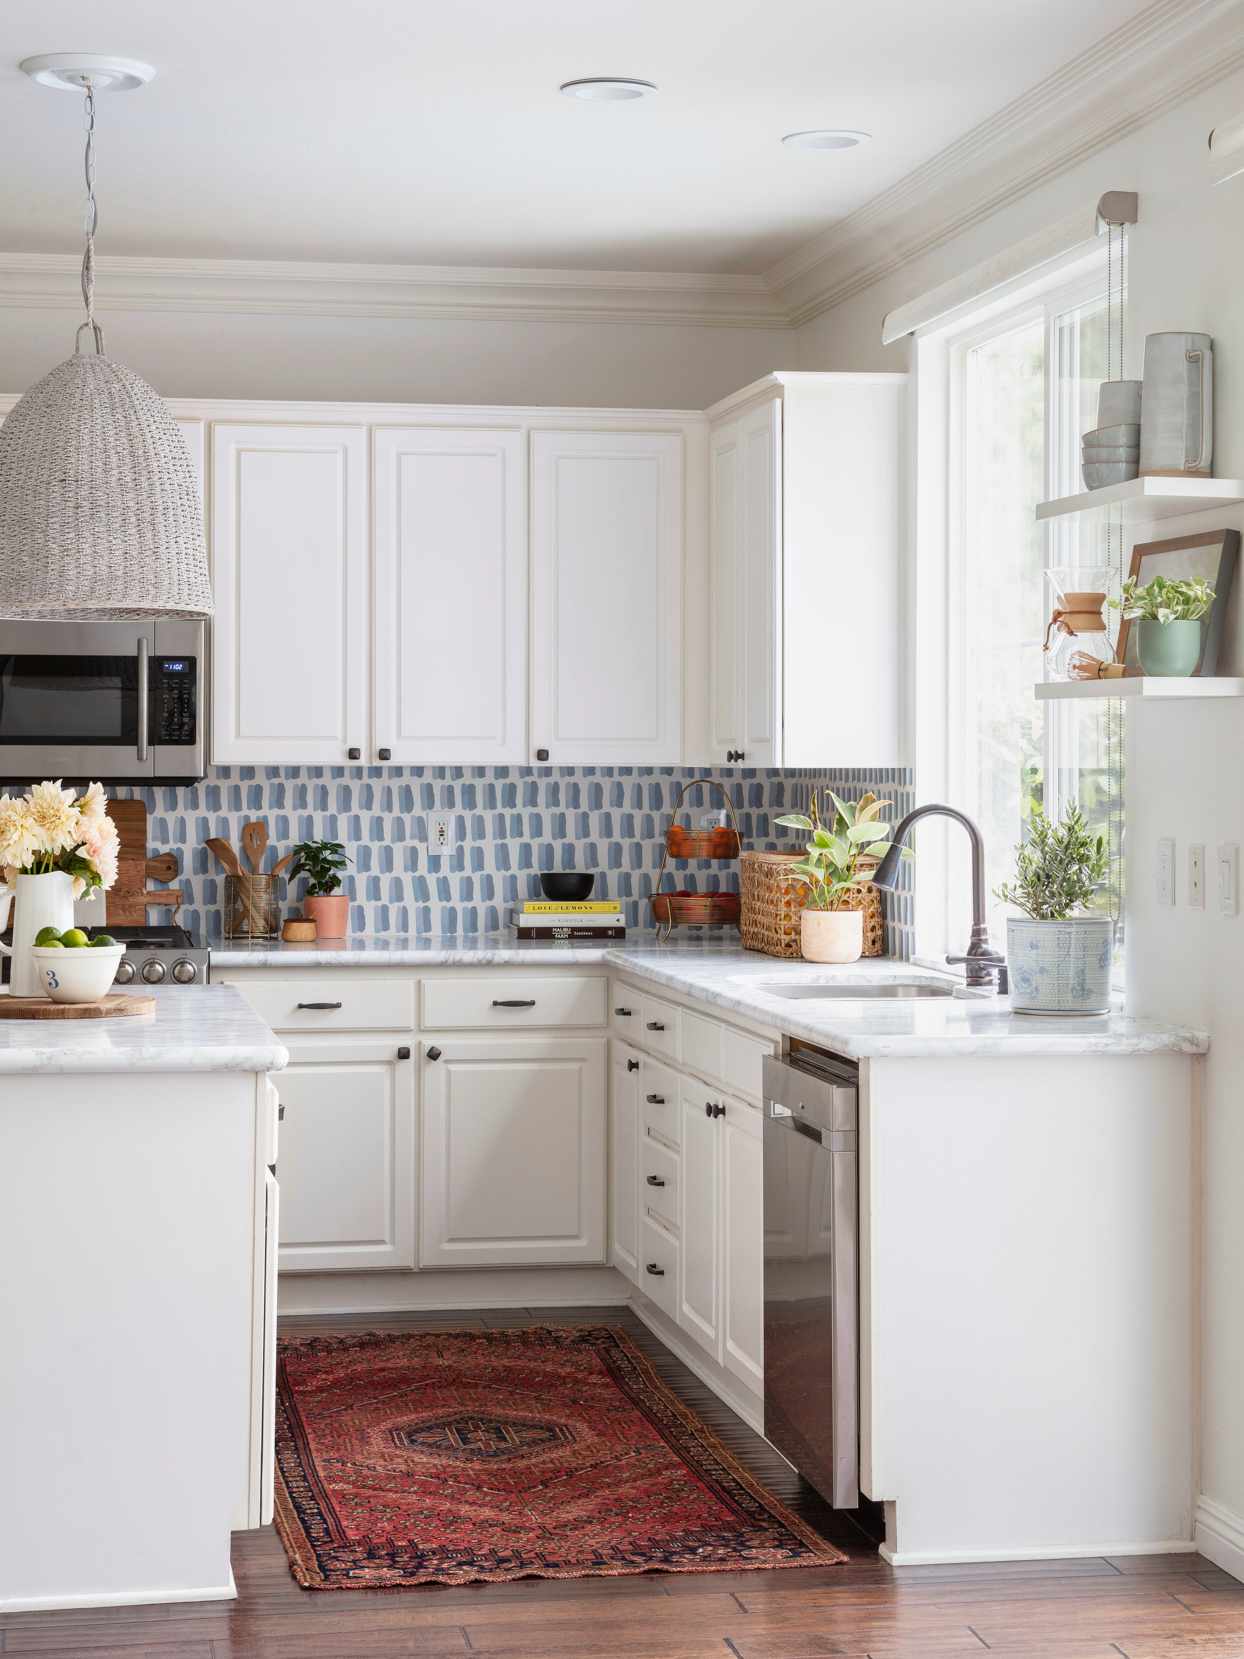 20 Small Kitchen Decorating Ideas for a Big Impact   Better Homes ...